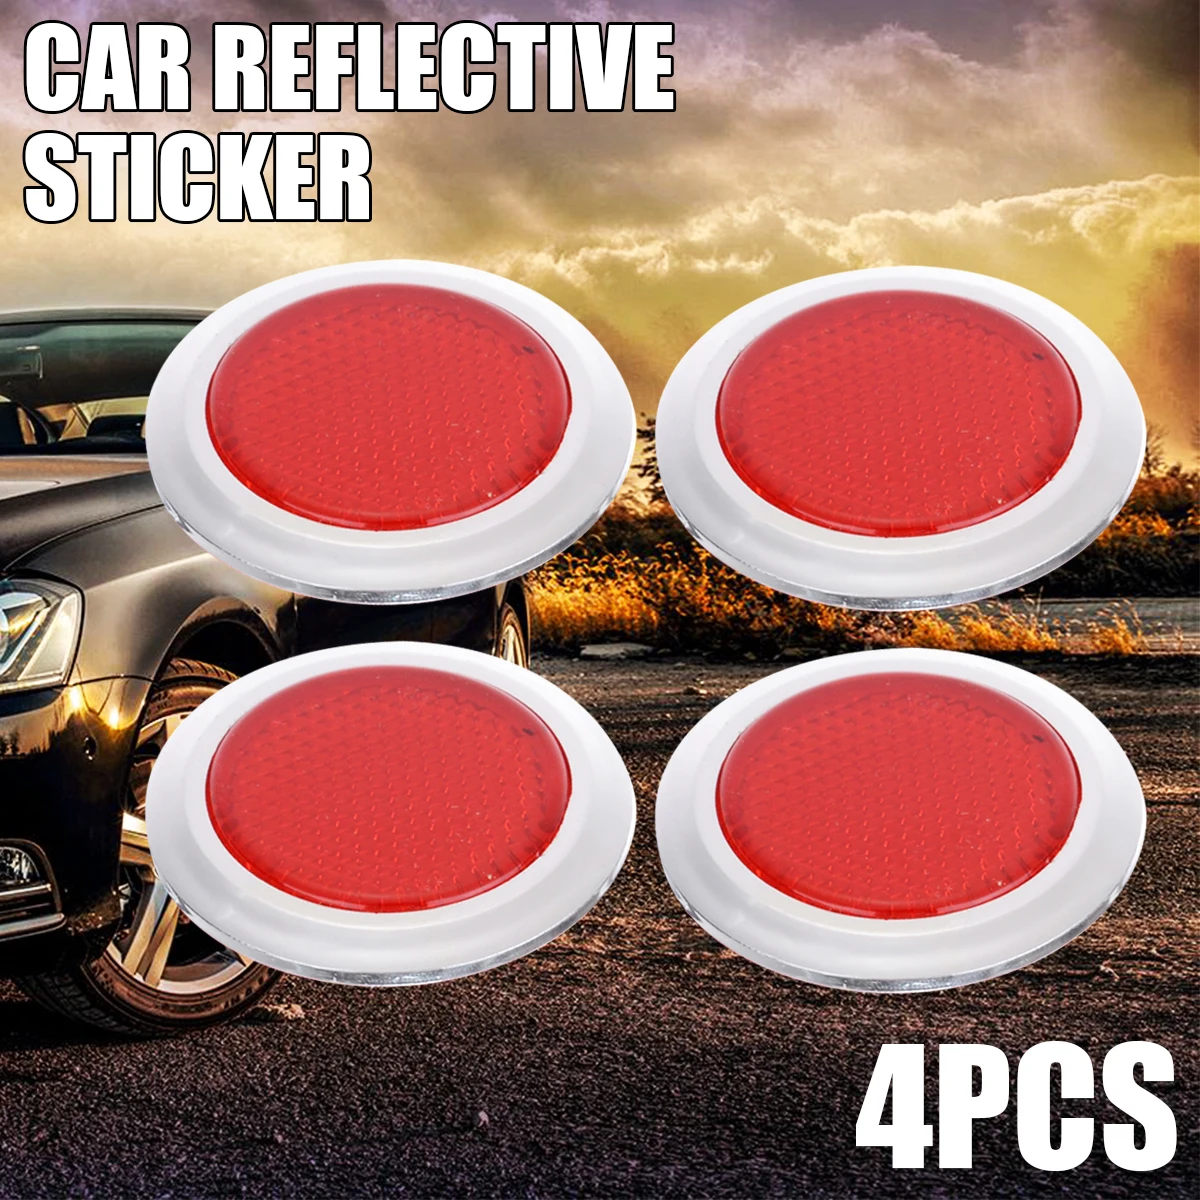 4 Pcs Auto Car Plastic Round Reflective Reflector Sticker Red S9 B4m4 for sale online 